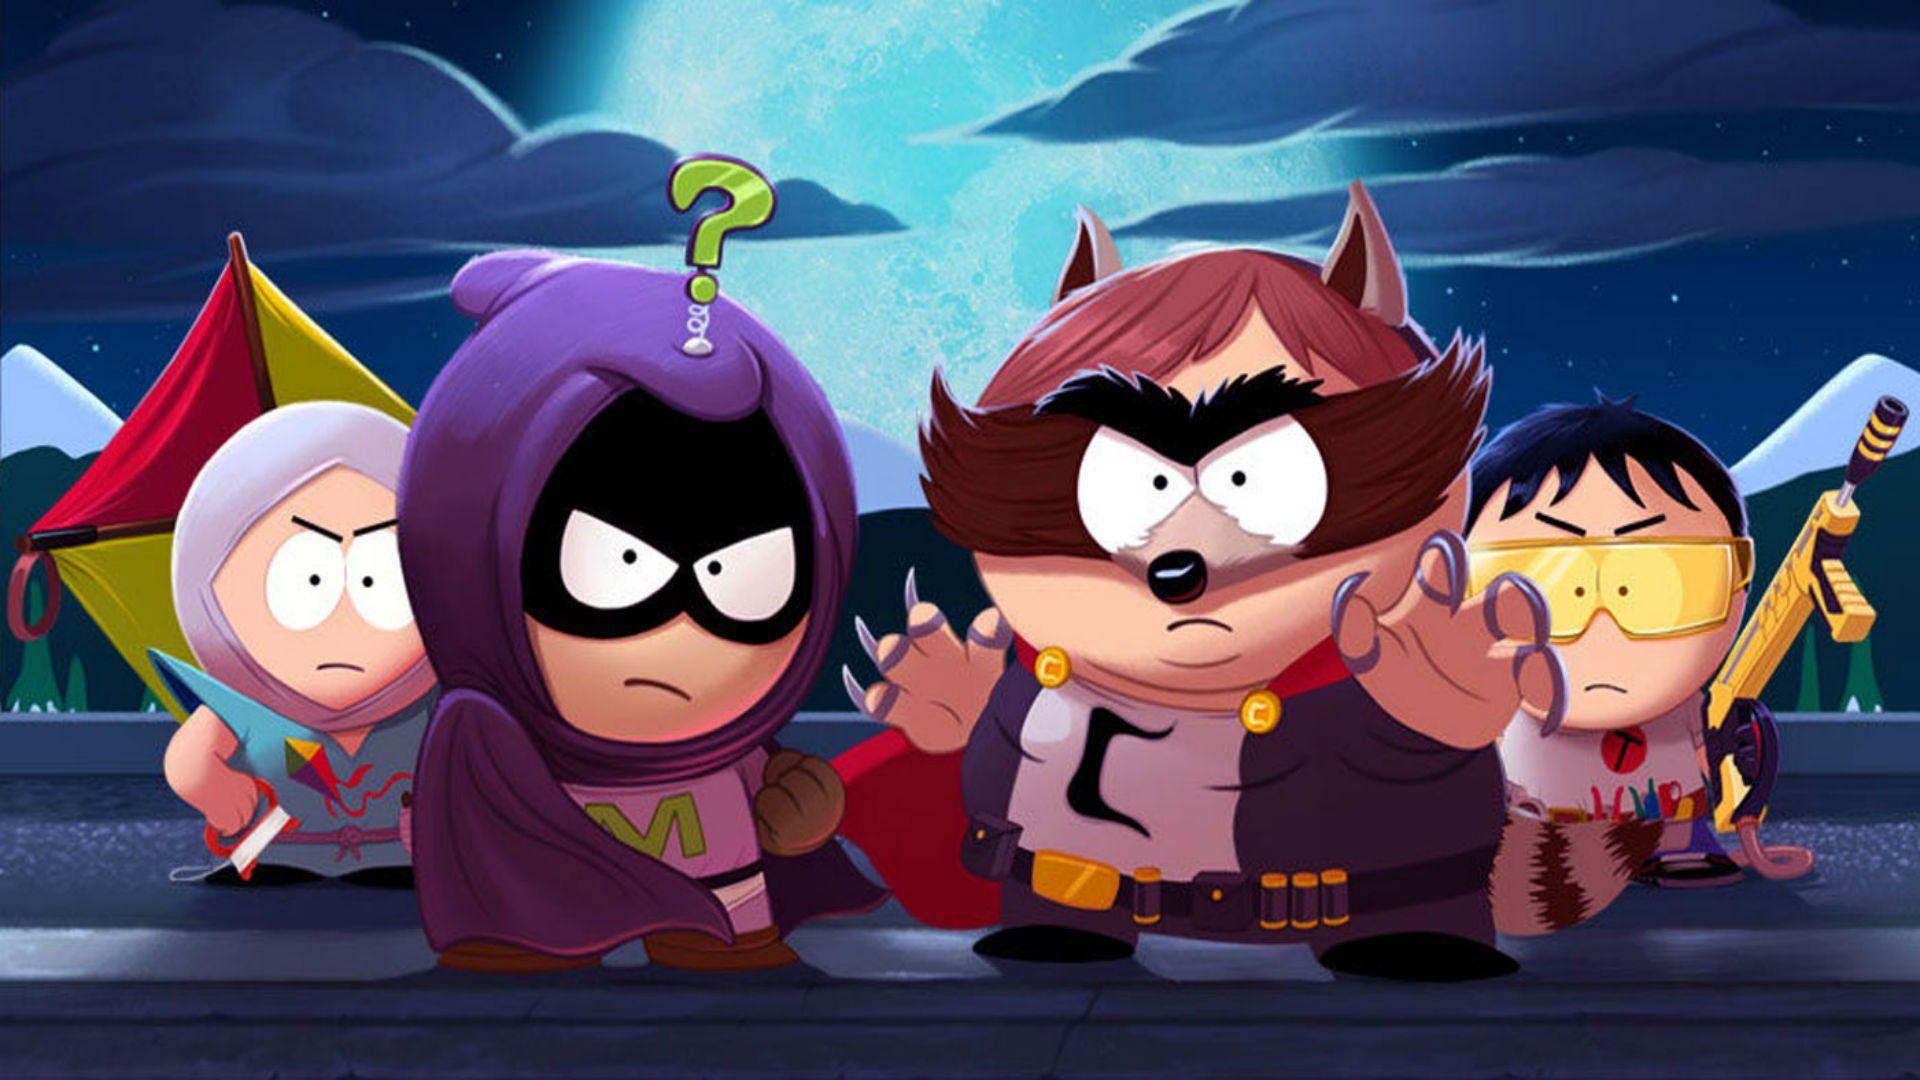 South Park: The Fractured But Whole is hit with another delay